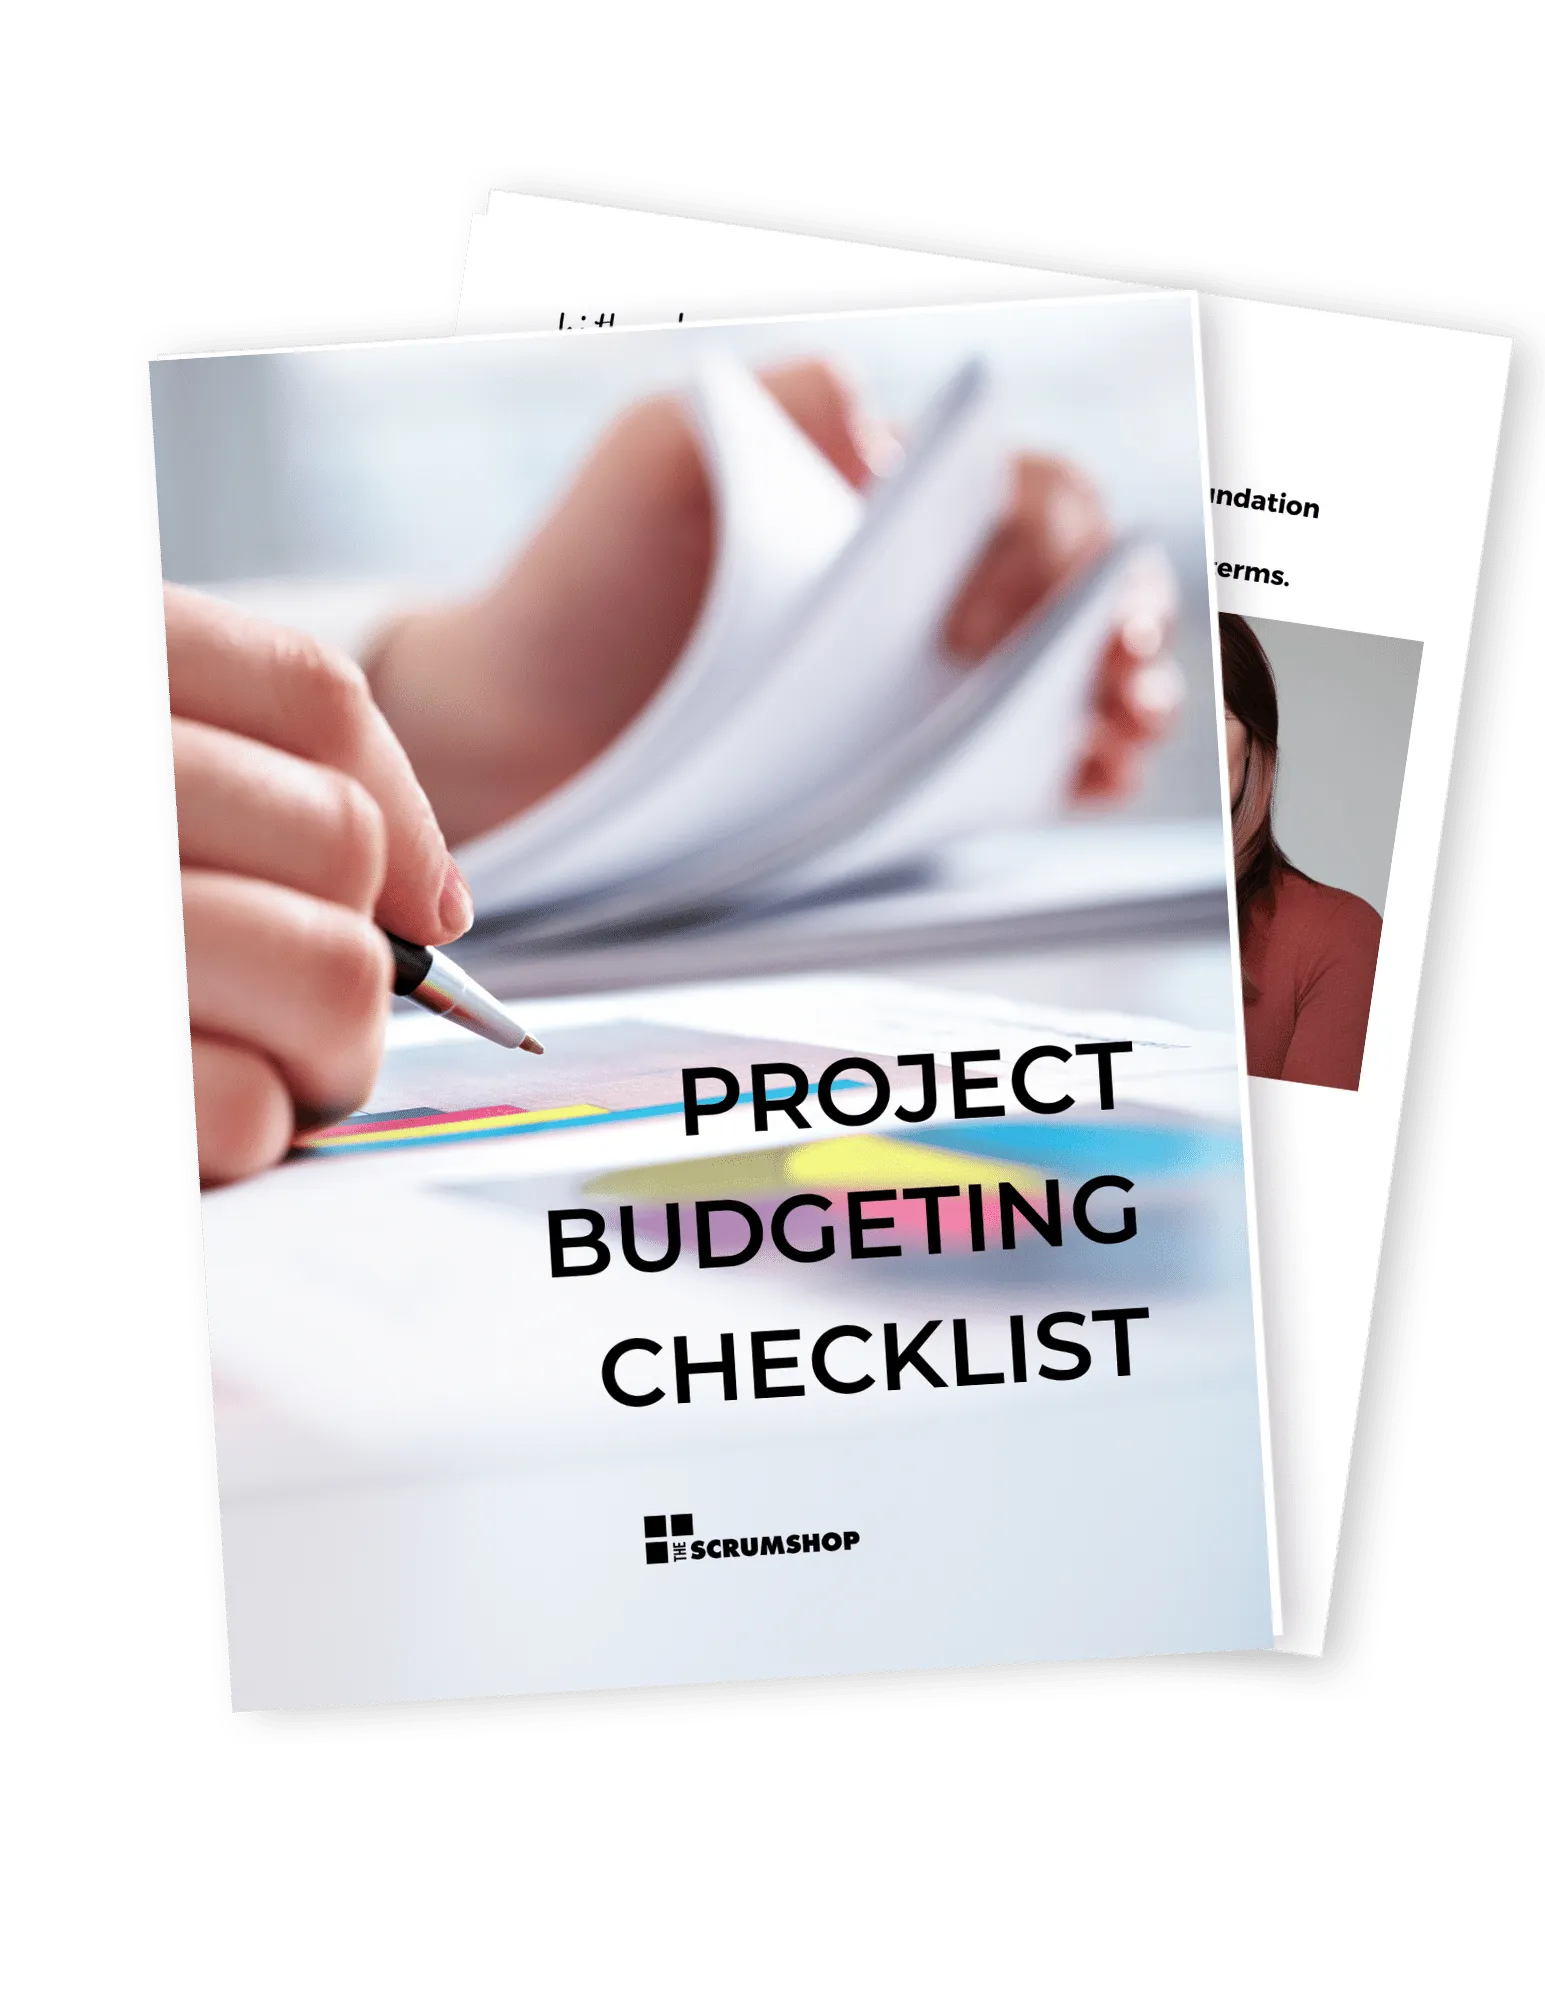 Project Budgeting Checklist